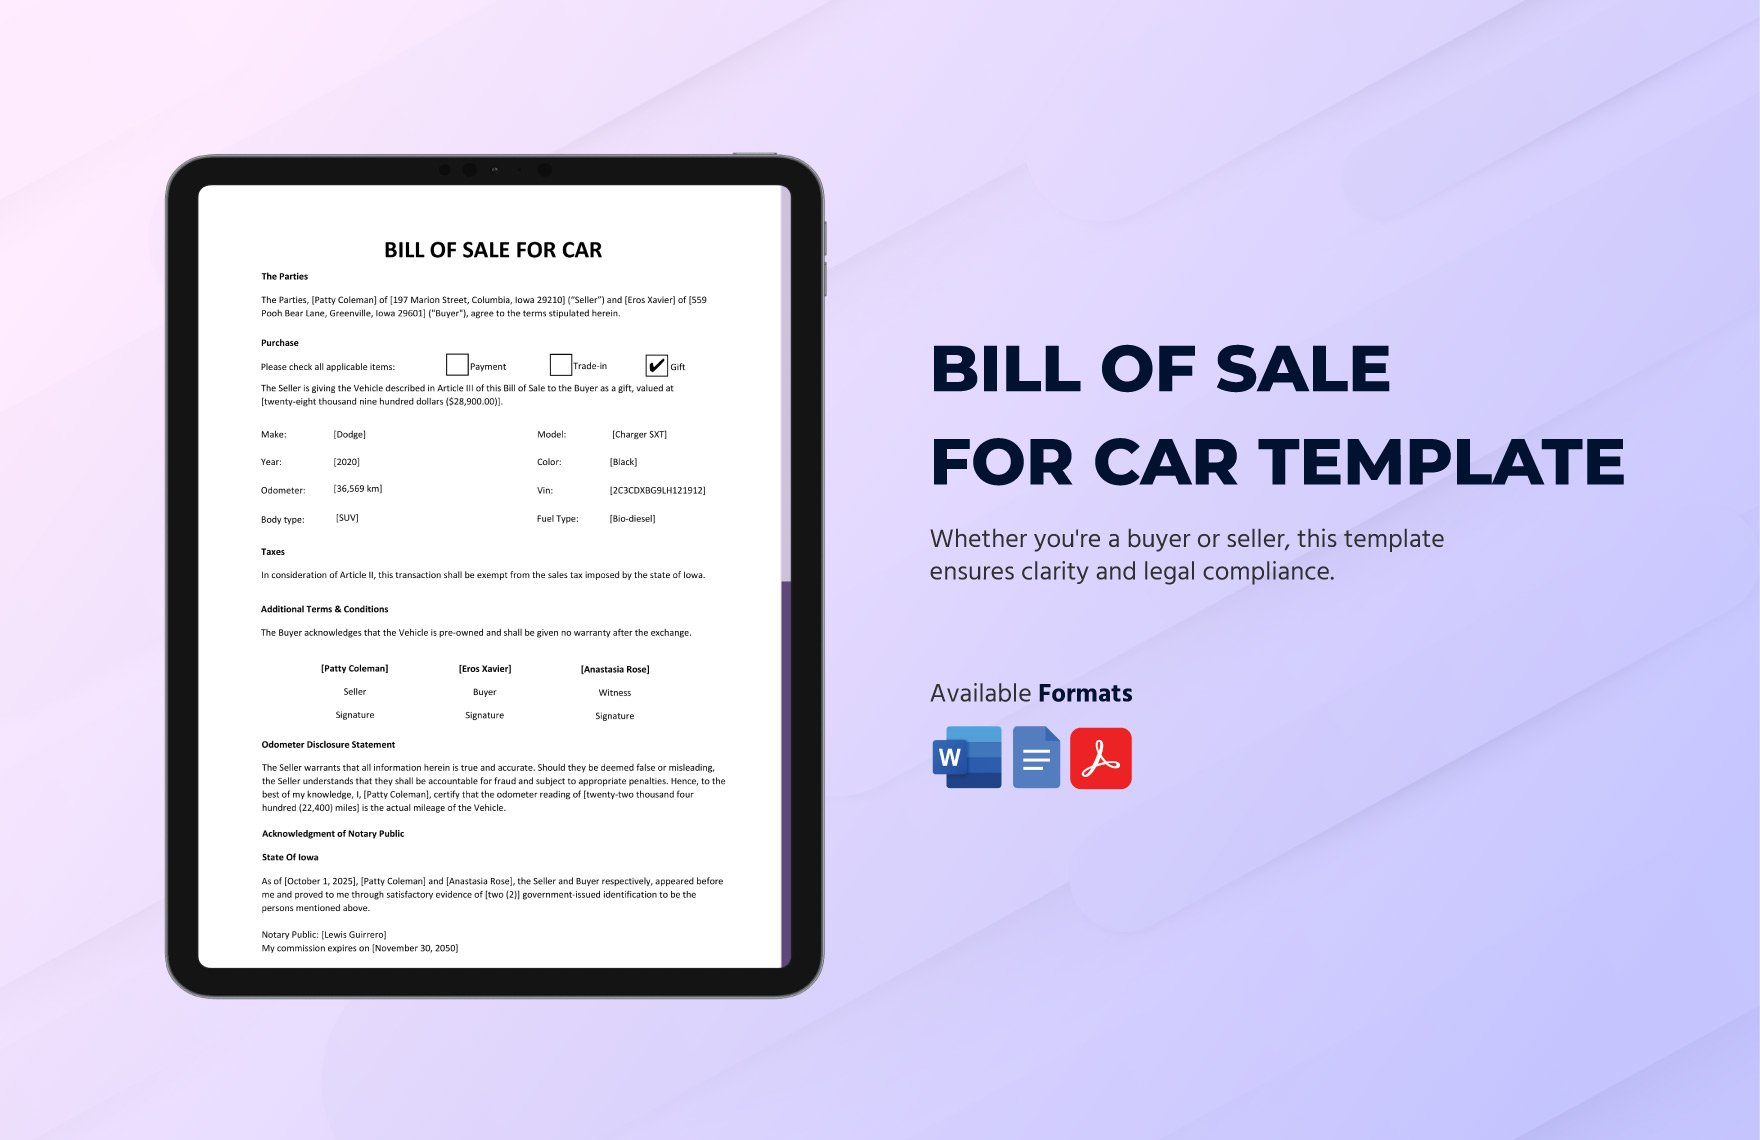 Bill of Sale For Car Template in Word, Google Docs, PDF